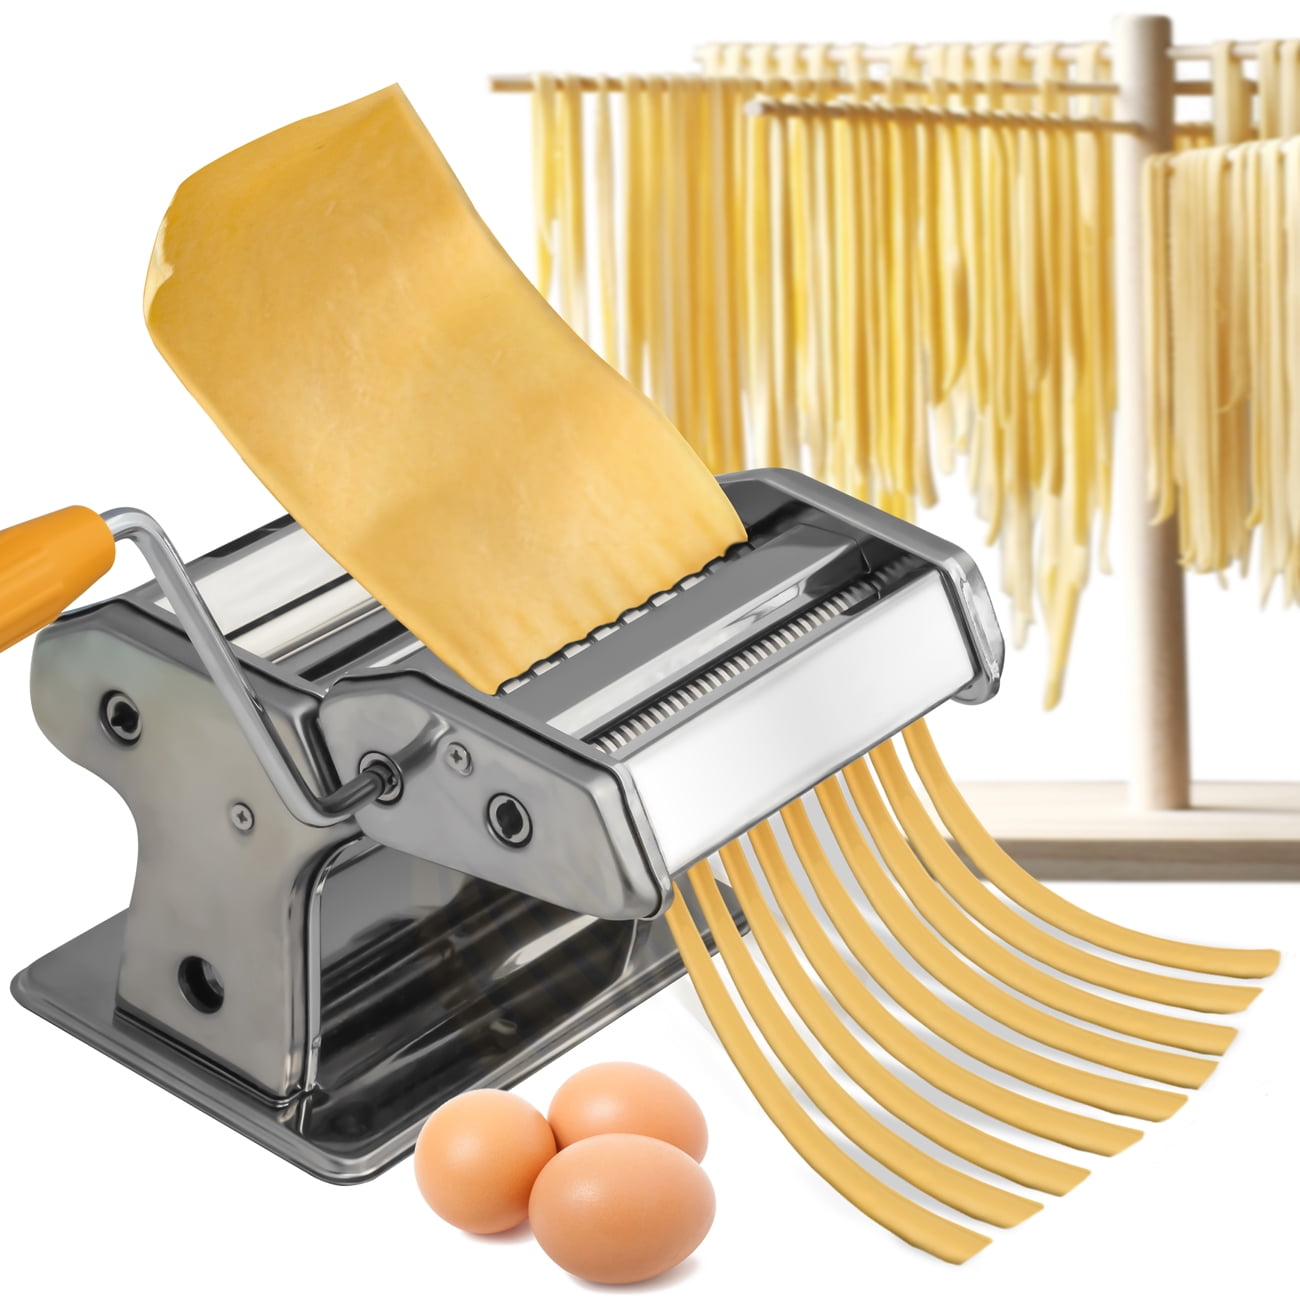 Zimtown Pasta Machine, Roller Pasta Maker, Noodles Maker Rollers and Cutter,  Includes Cutter, Hand Crank, and Instructions, 150 mm, Stainless Steel 